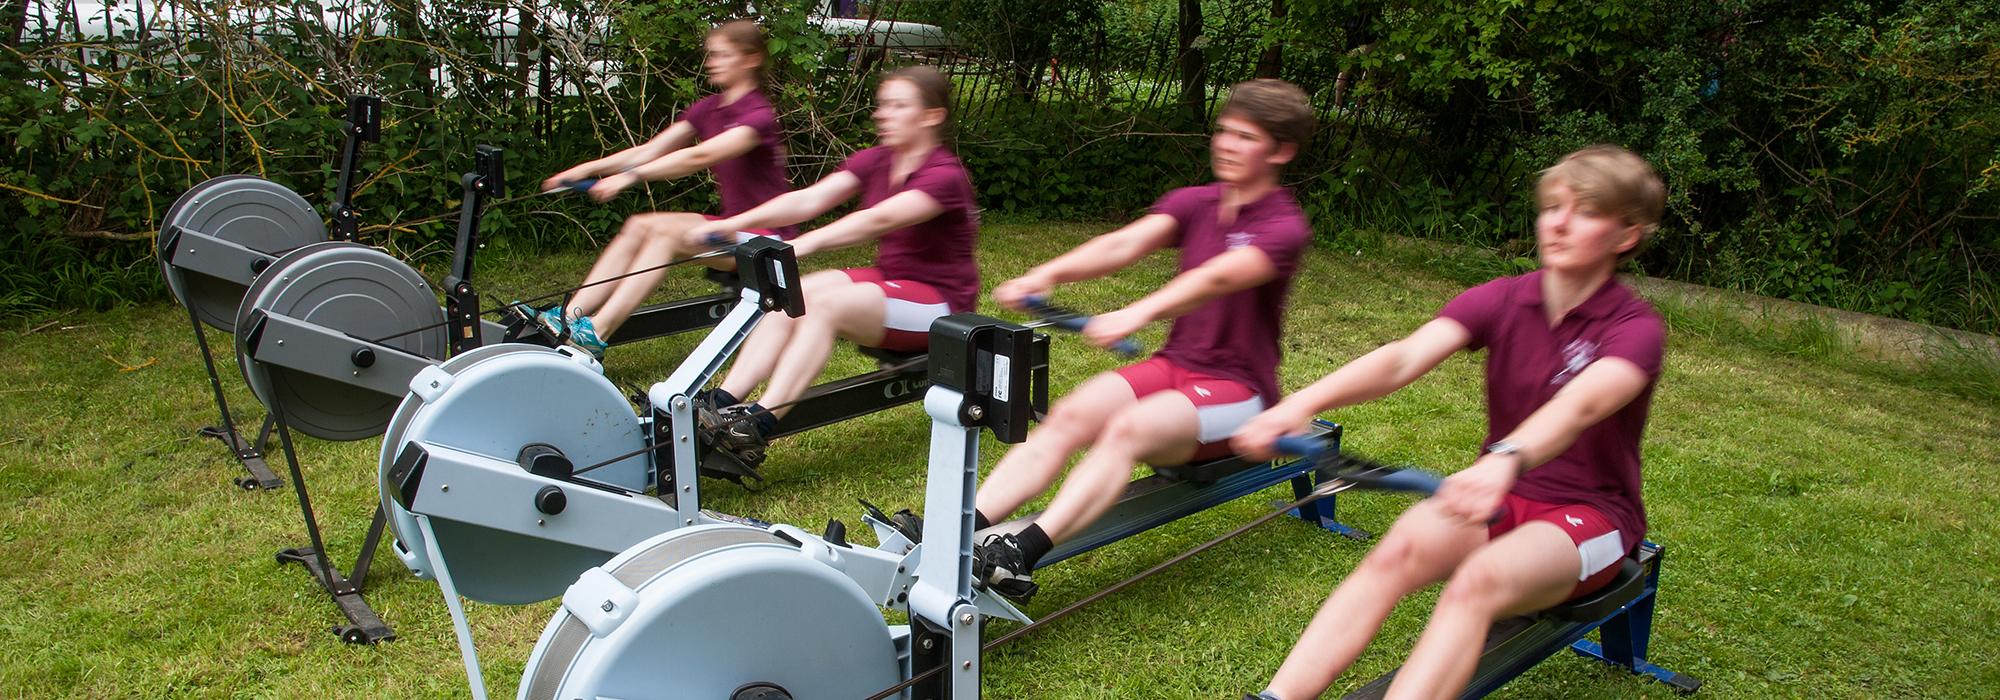 Rowers warming up on machines, Summer Eights 2014 - Photo: © John Cairns - www.johncairns.co.uk